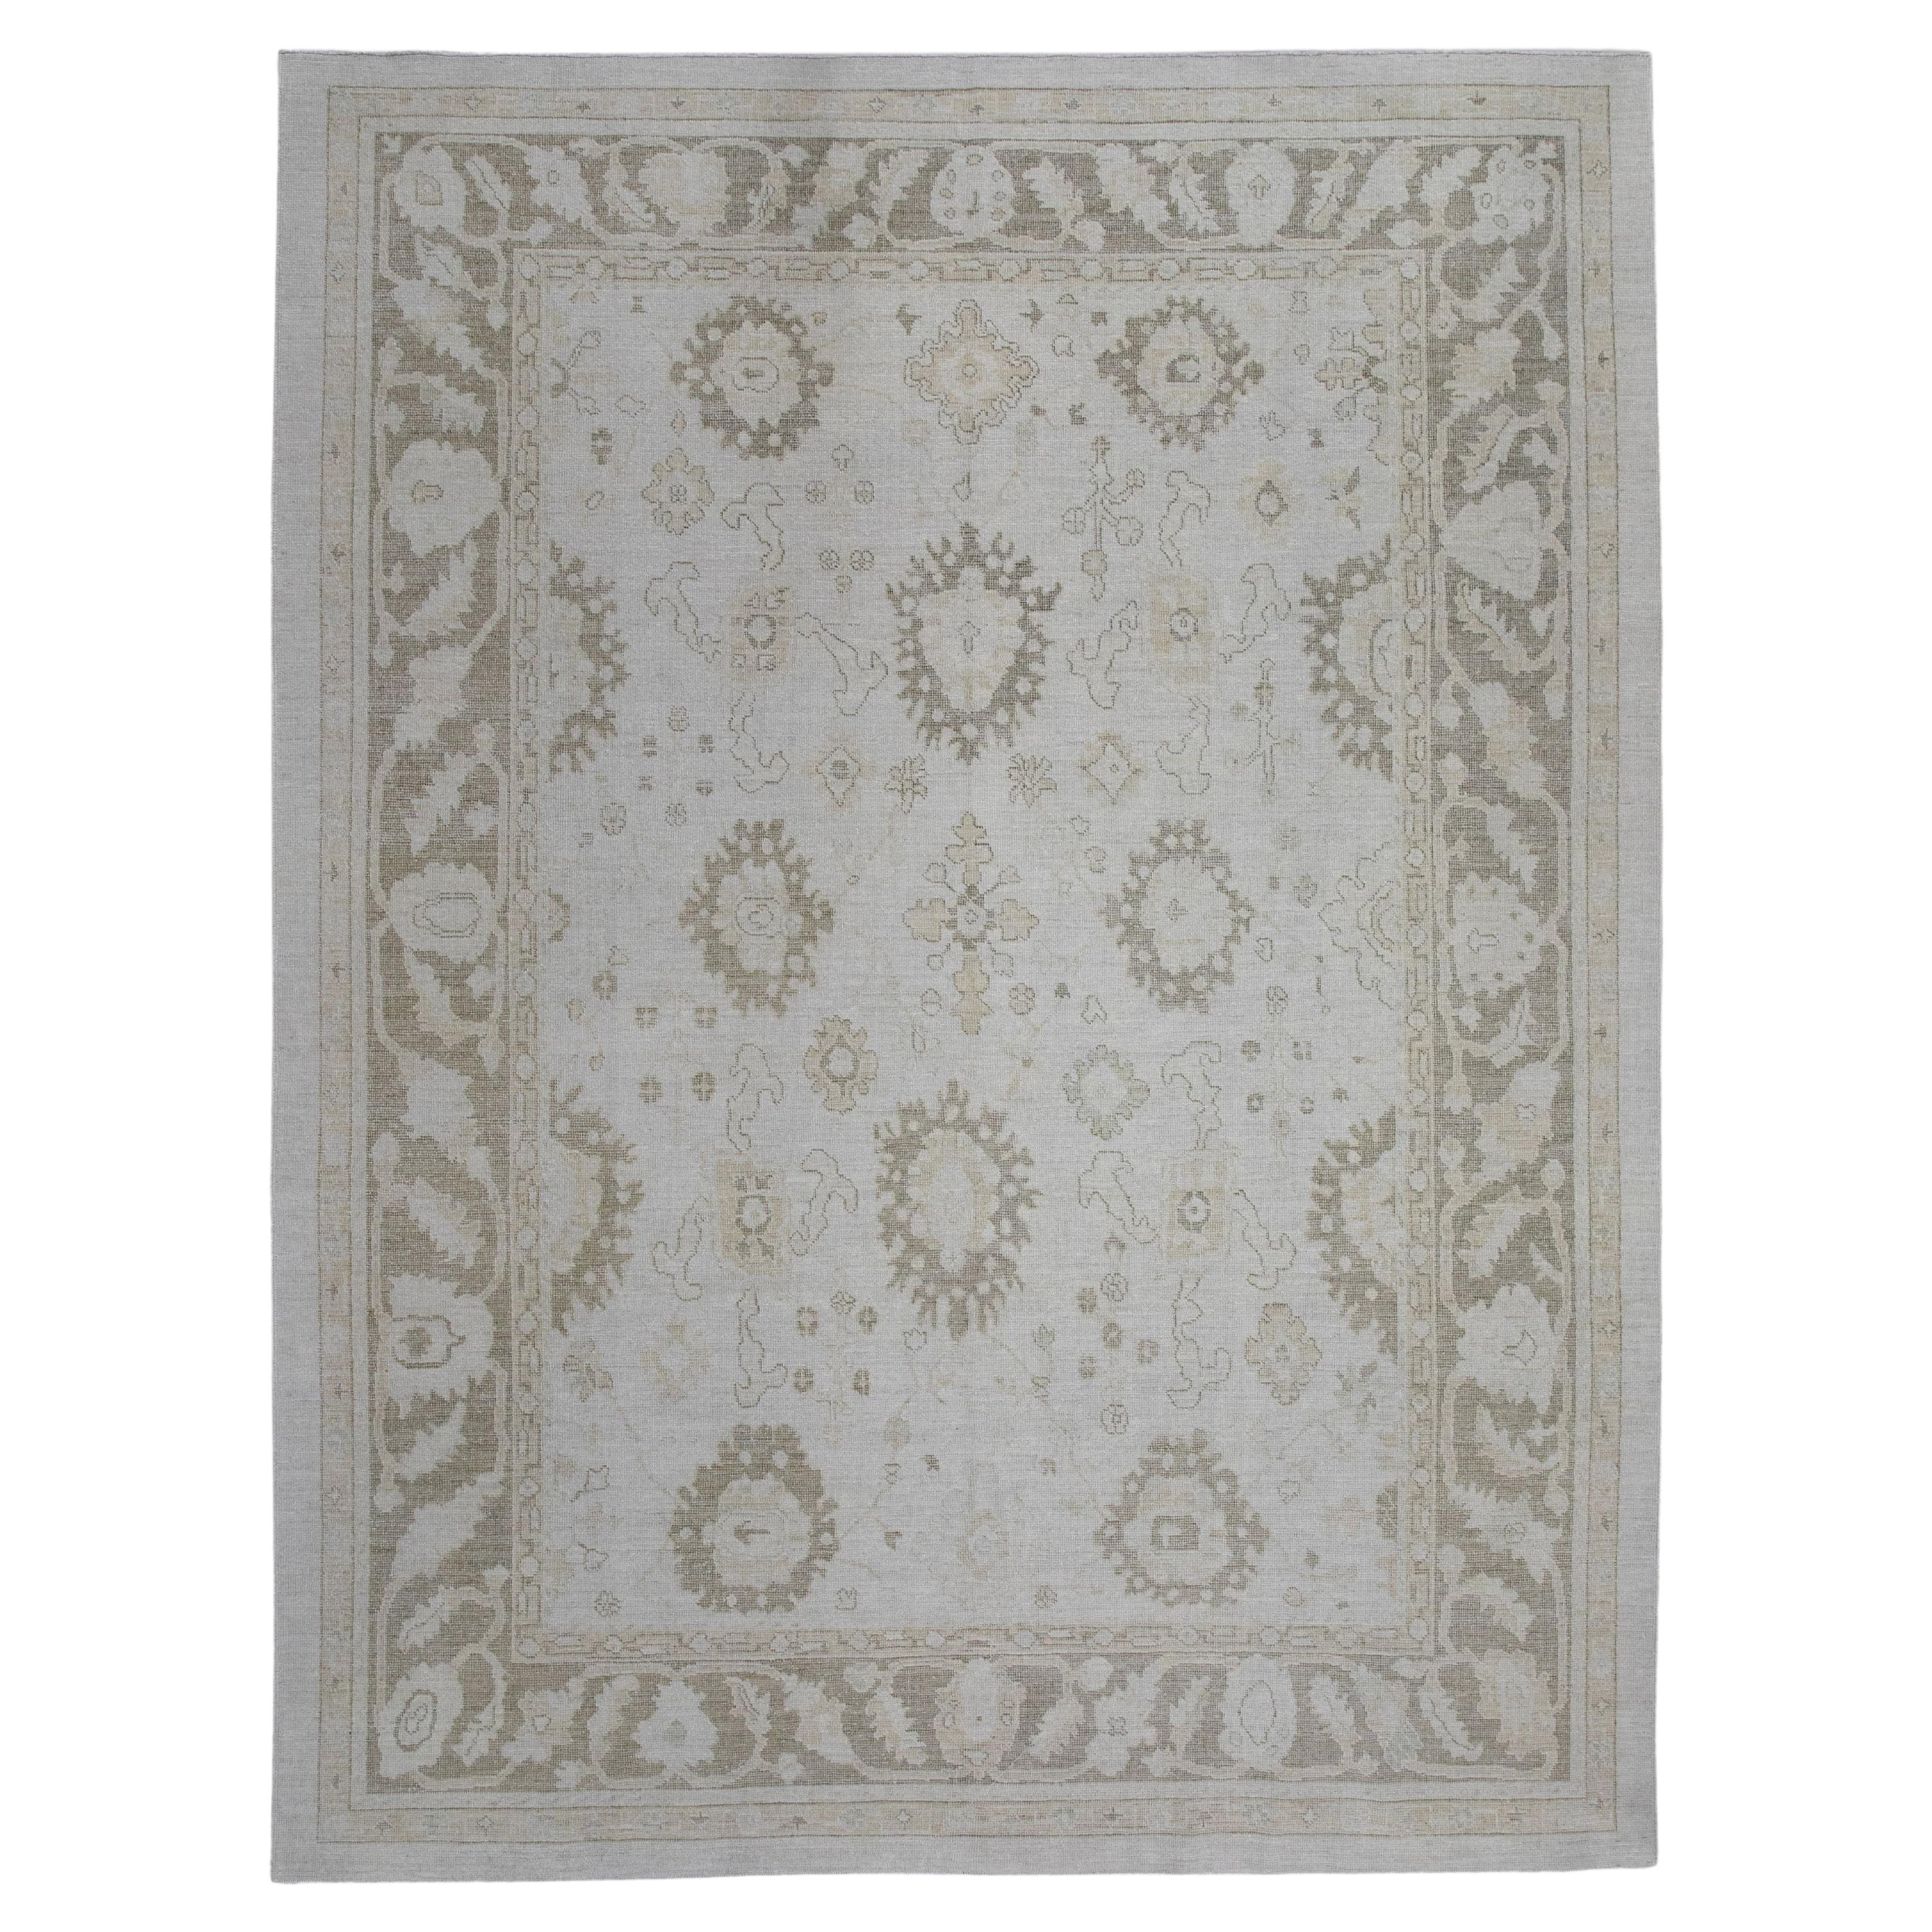 White & Green Floral Design Handwoven Wool Turkish Oushak Rug 10' X 13'4" For Sale